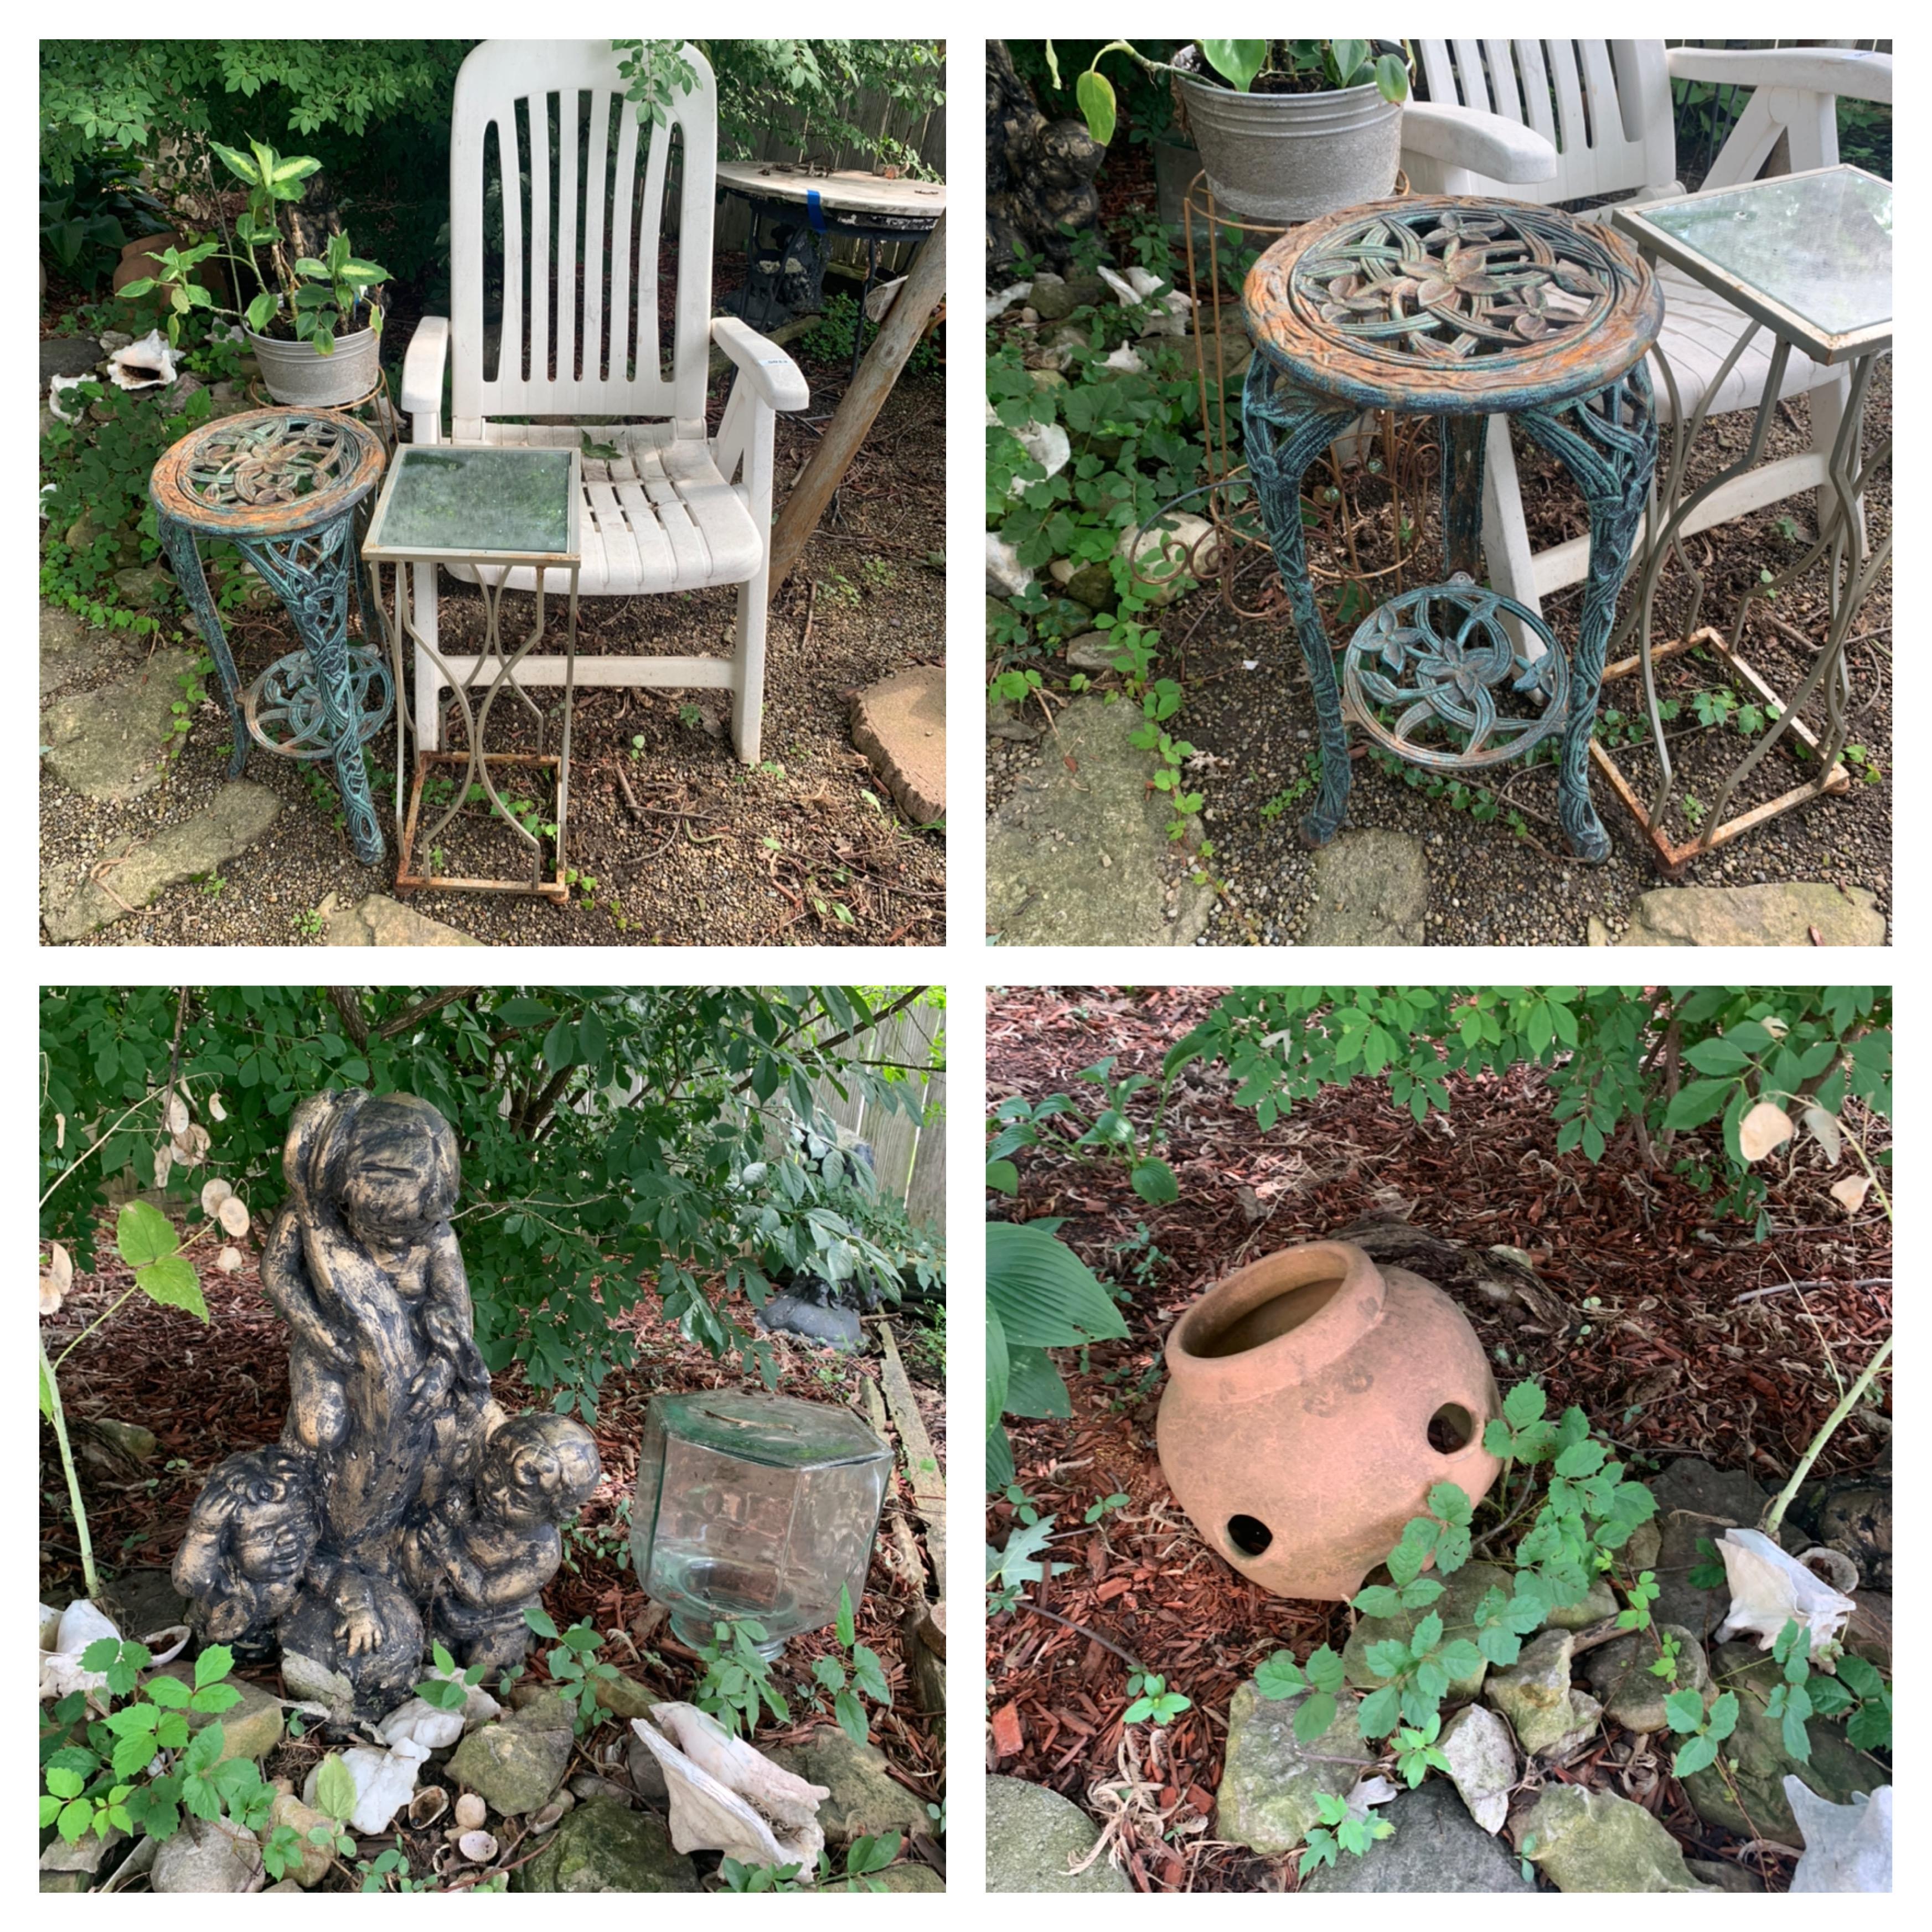 Resin Chair, Statue, Shells & More. See photos.